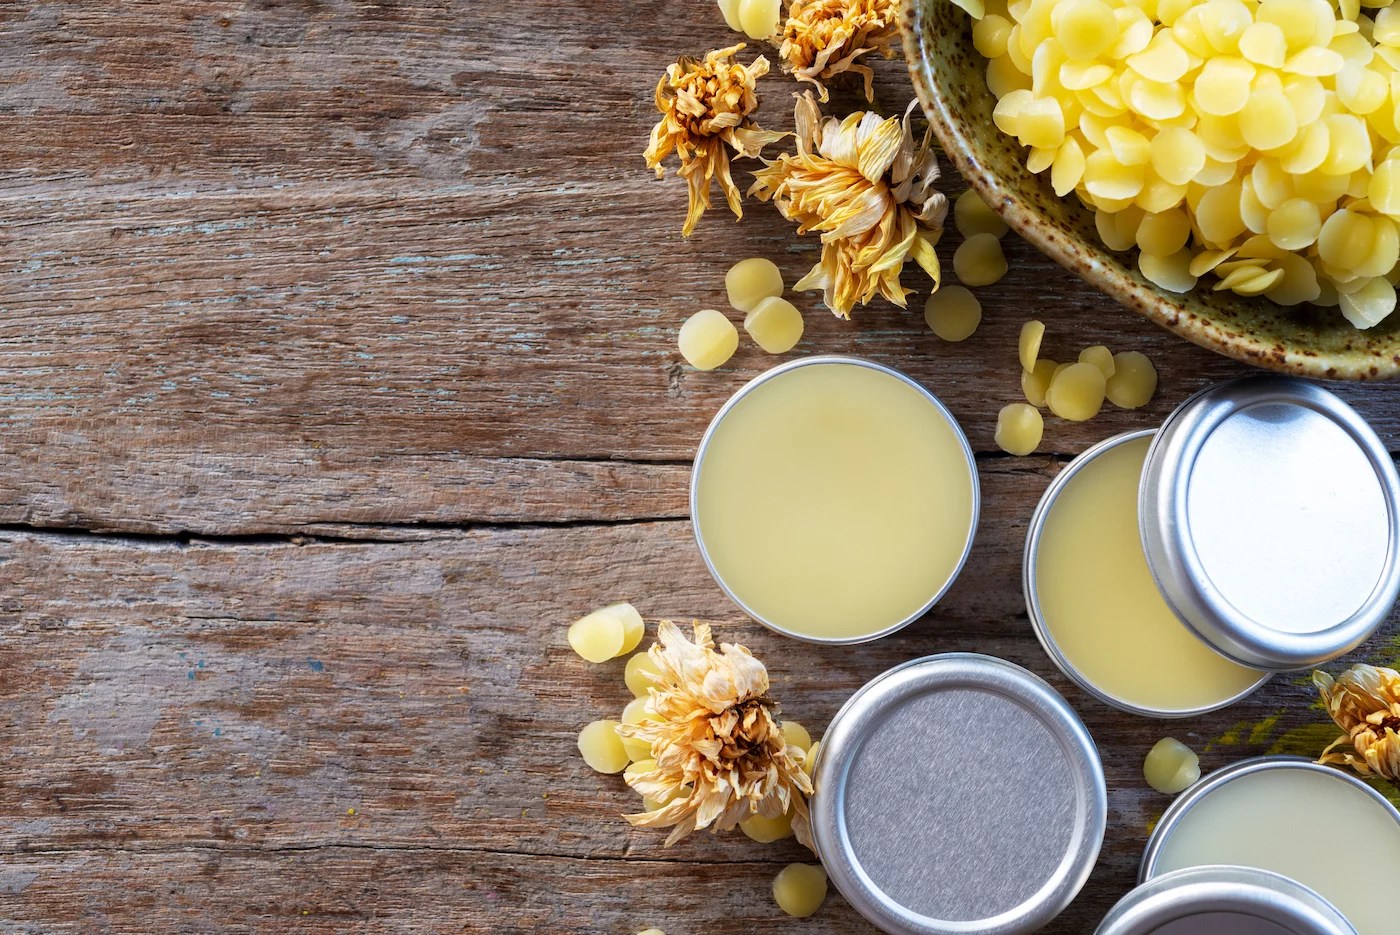 Uses for beeswax beyond lip balm from skin-care experts